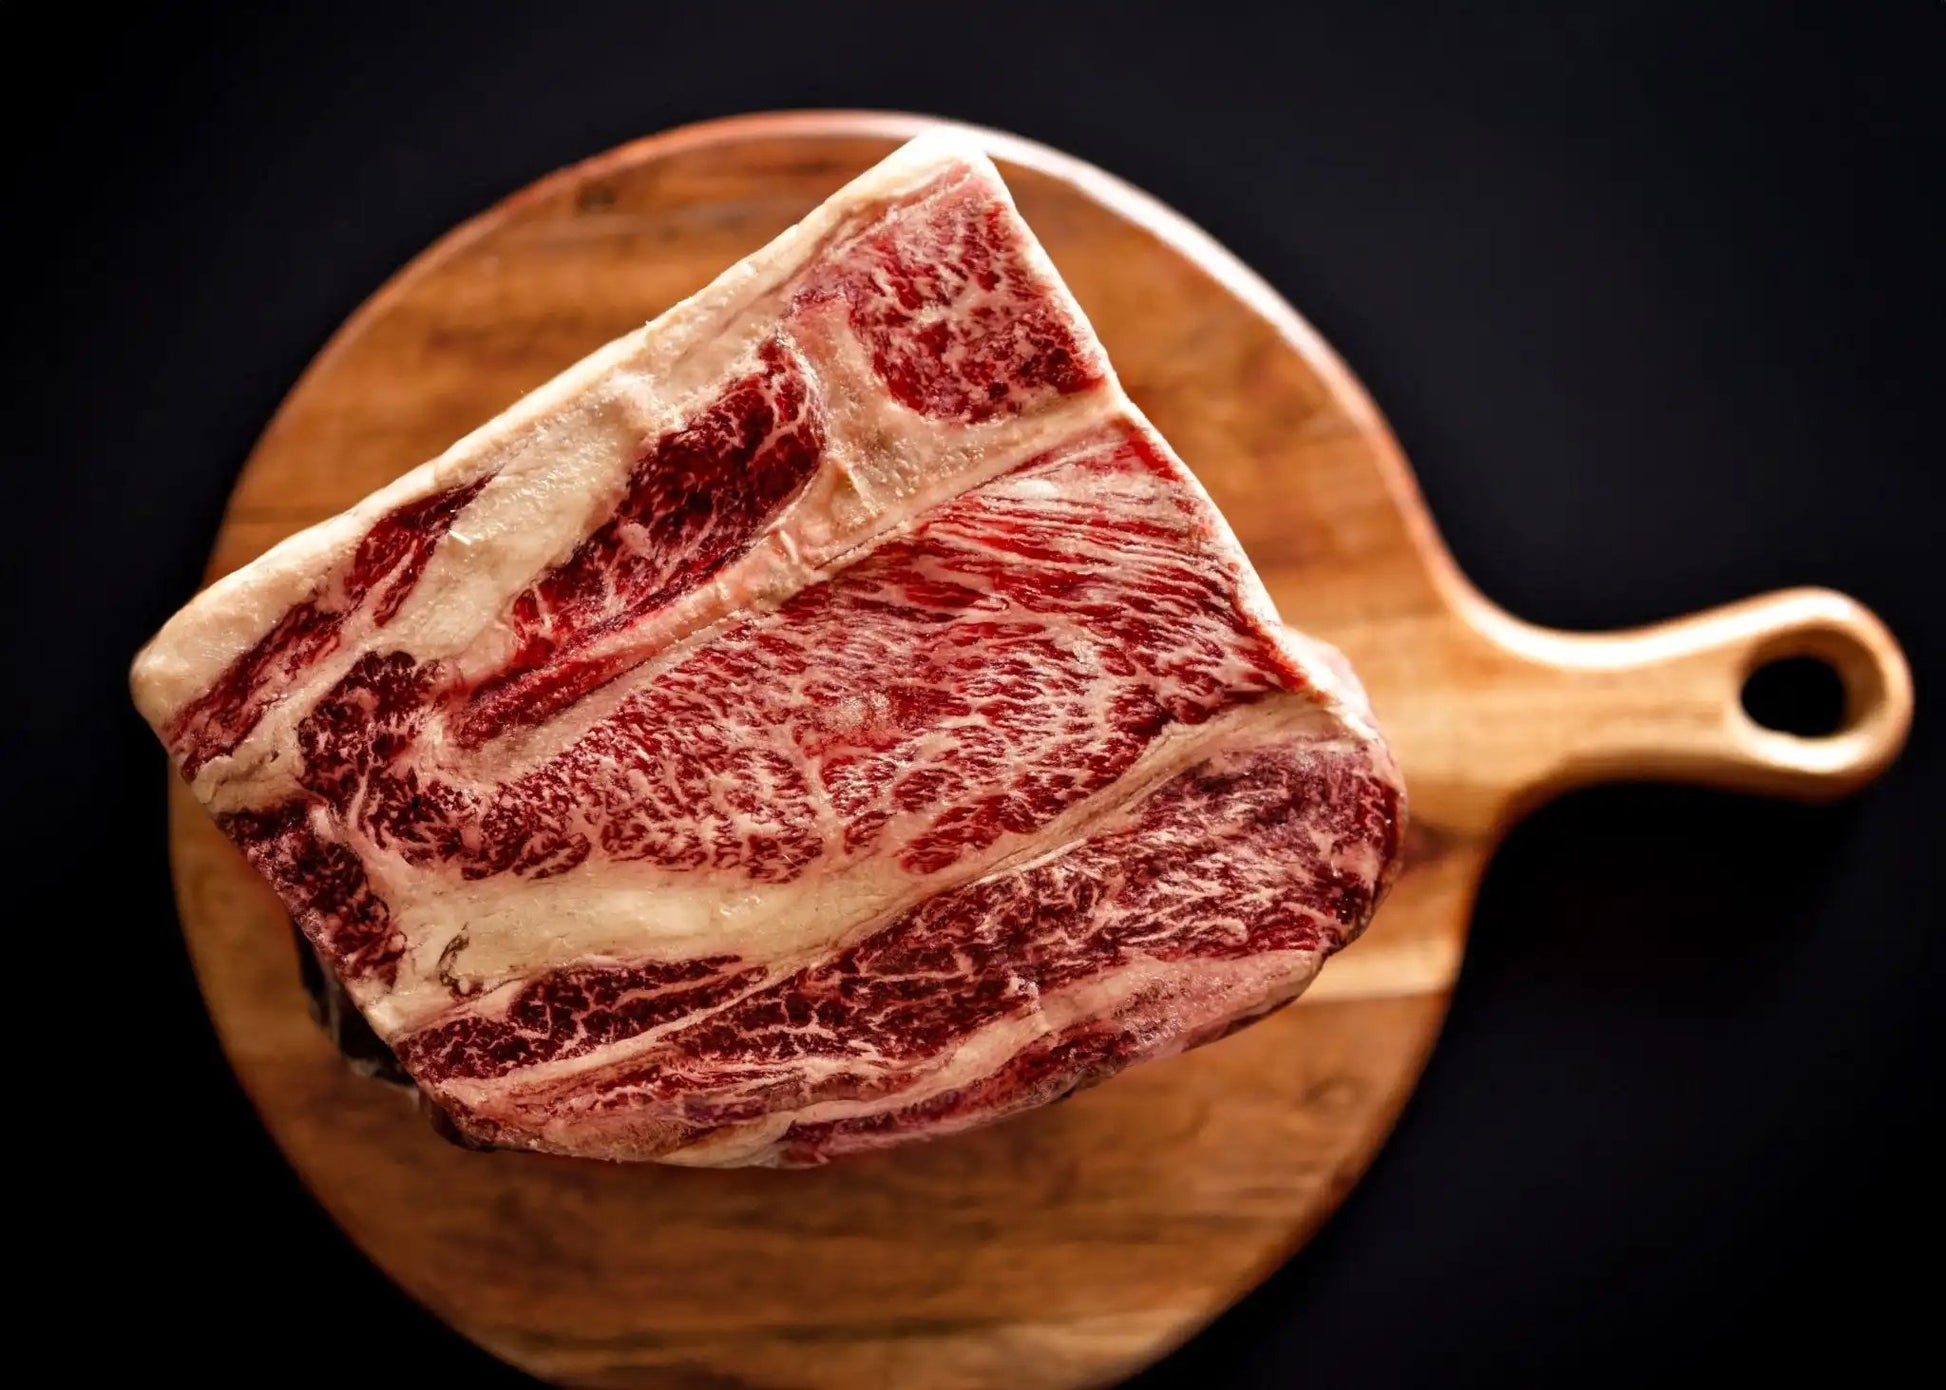 Grass-Fed Pasture-Raised Wagyu or Angus 1/16th Beef Box - 25lbs of Beef - The Hufeisen-Ranch (WYO Wagyu)